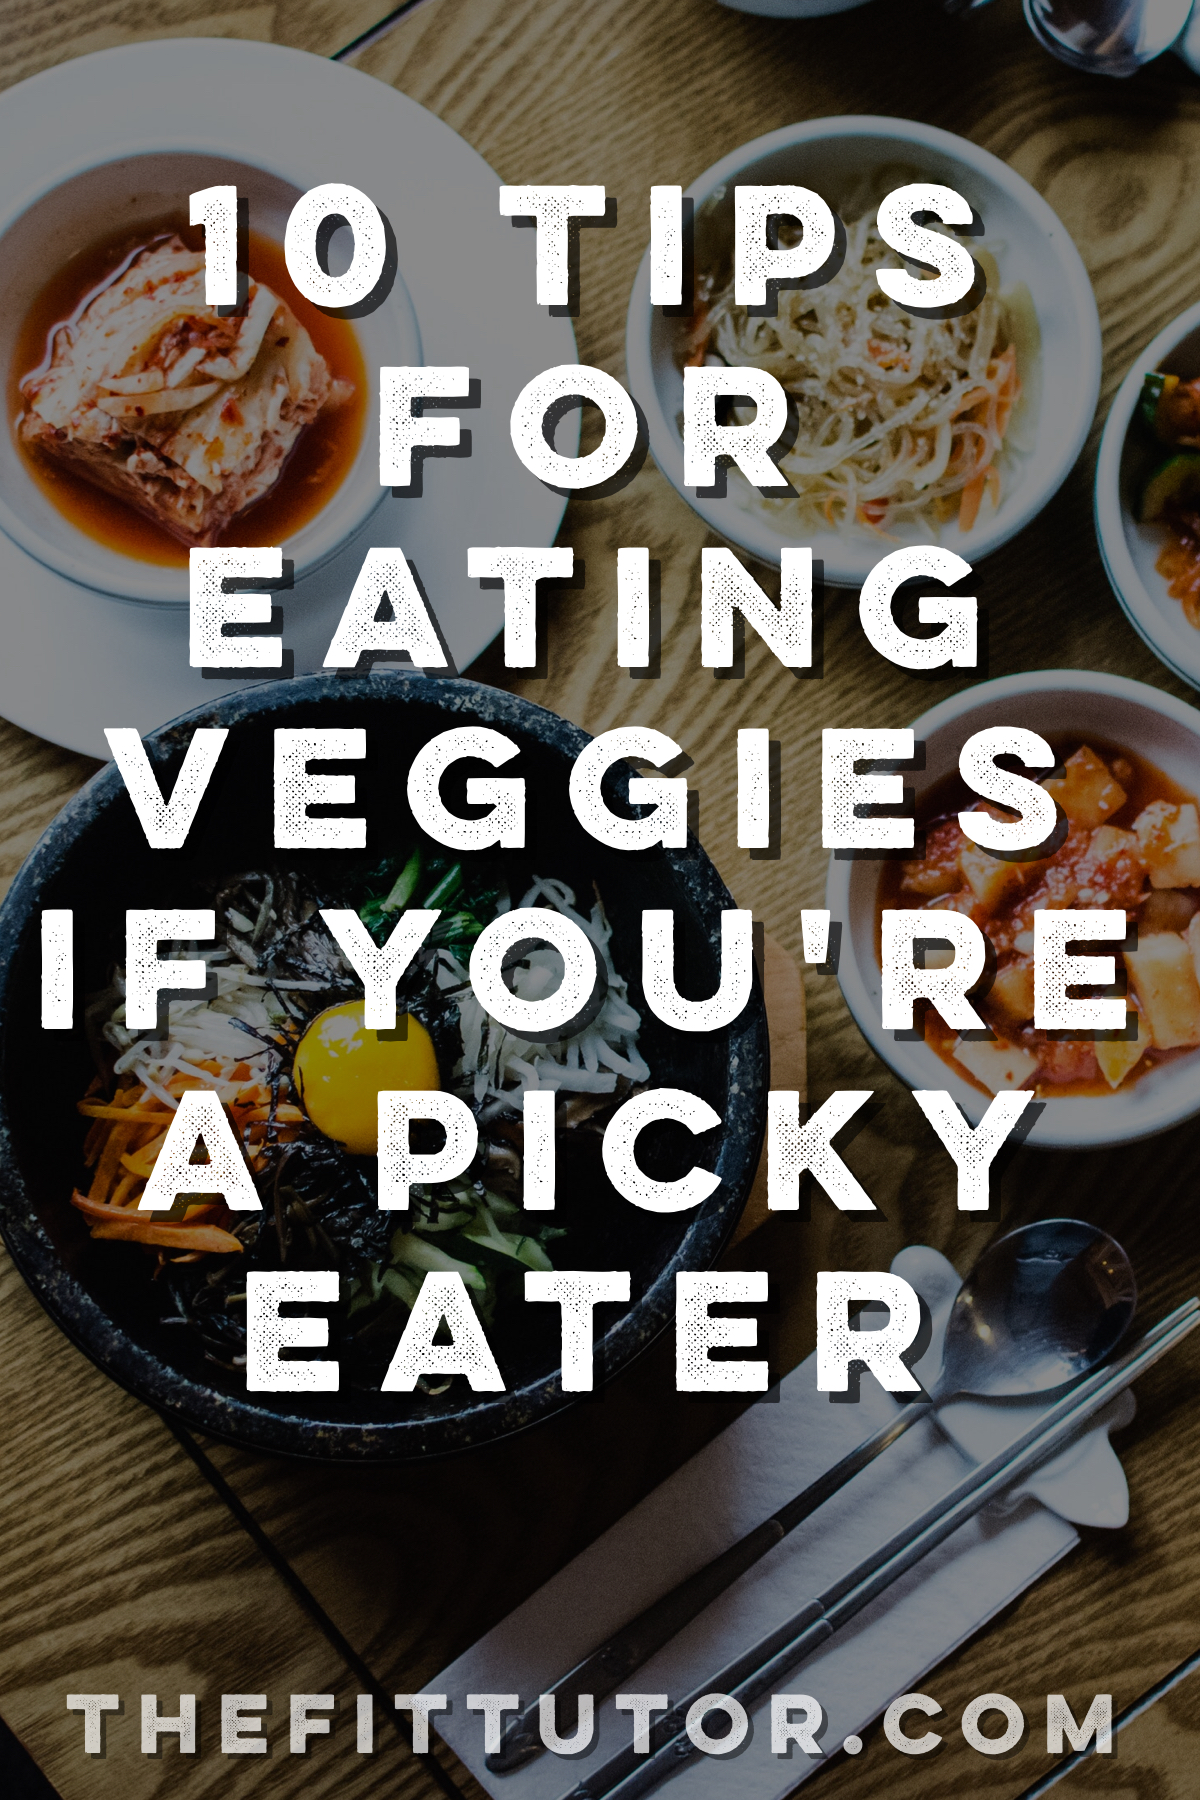 Wondering how to eat healthily if you don't like vegetables? Try these 10 tips to eat vegetables for picky eaters! Yes, they include pizza.